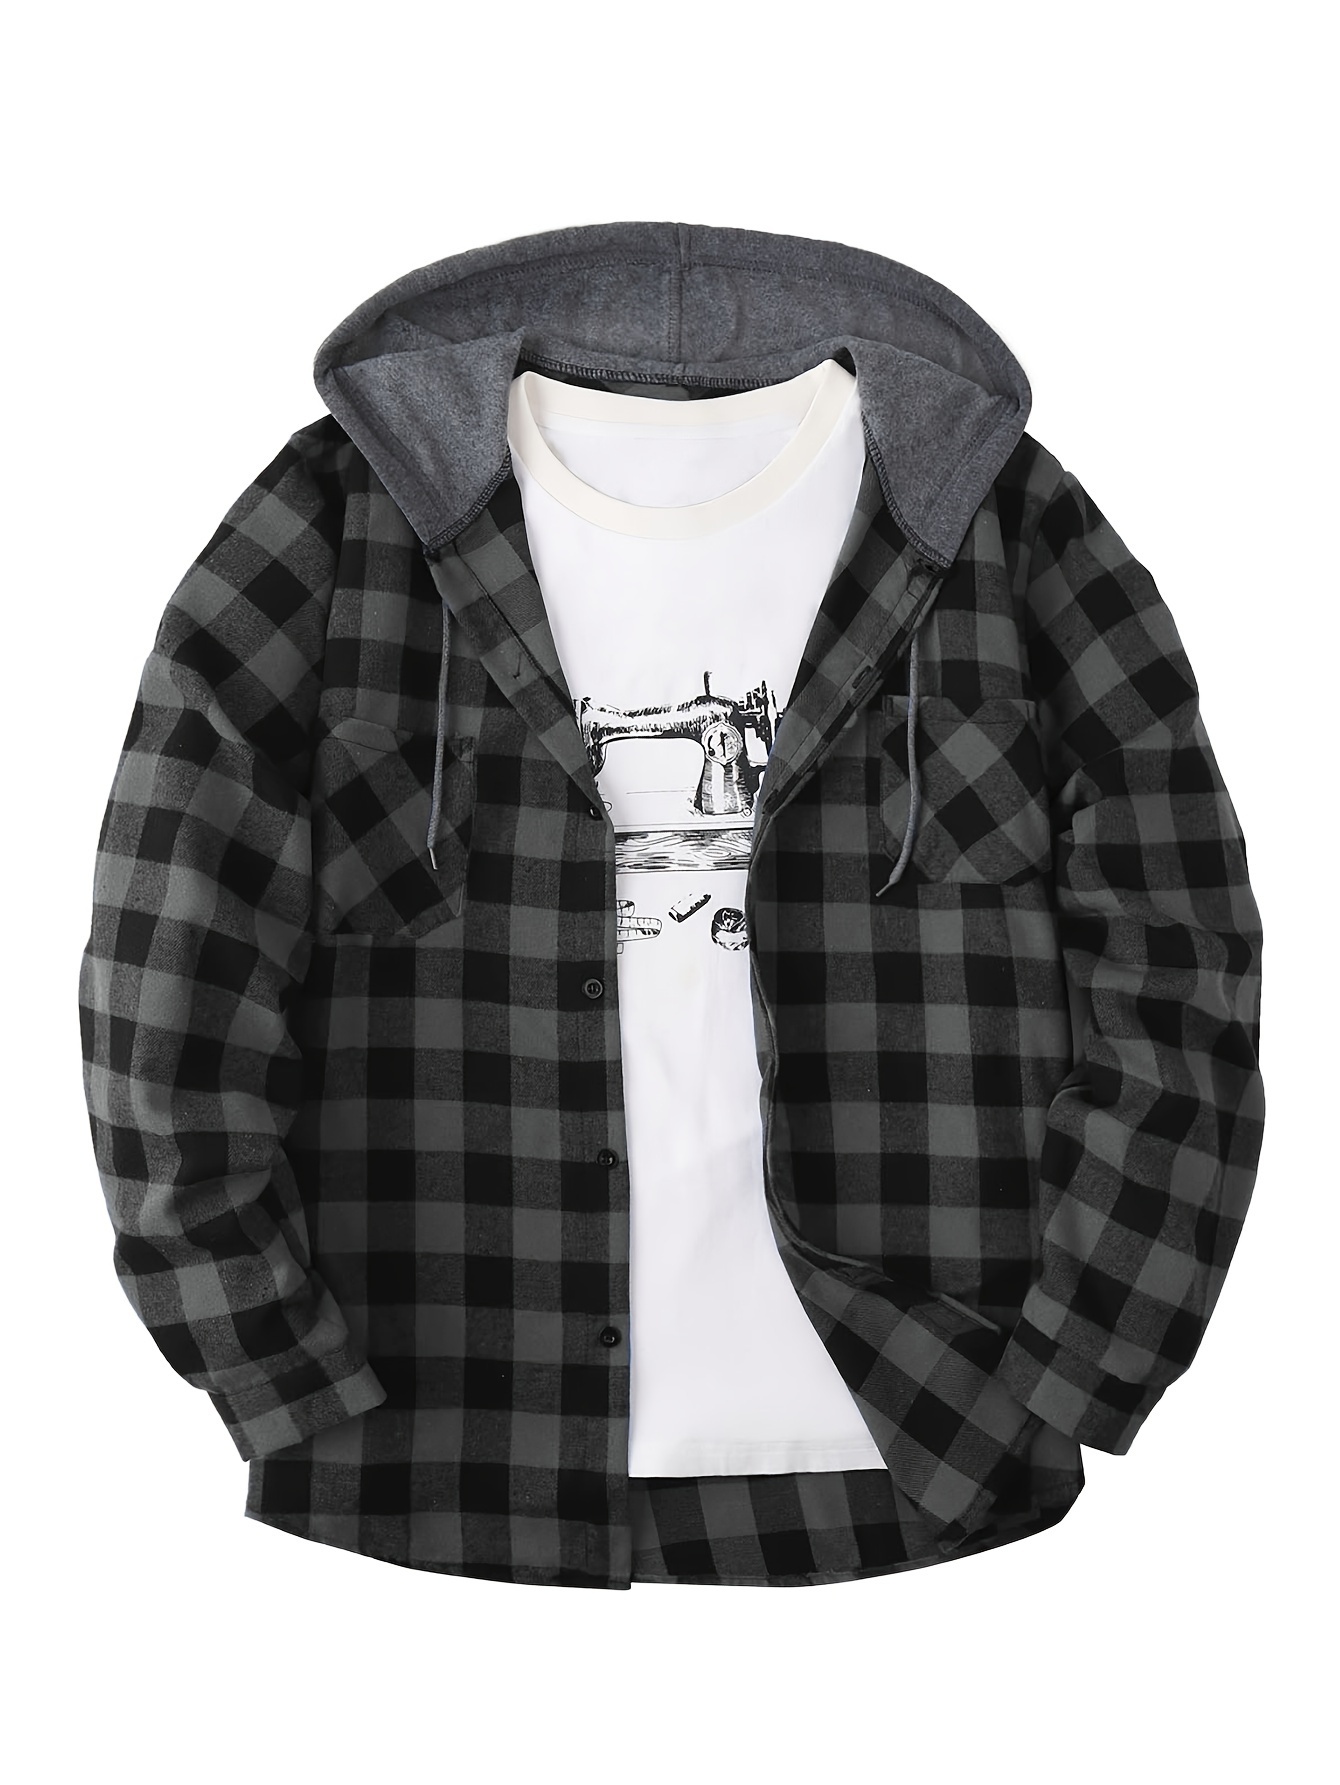 long sleeve casual regular fit button up hooded shirts jacket plaid shirt coat for men details 0